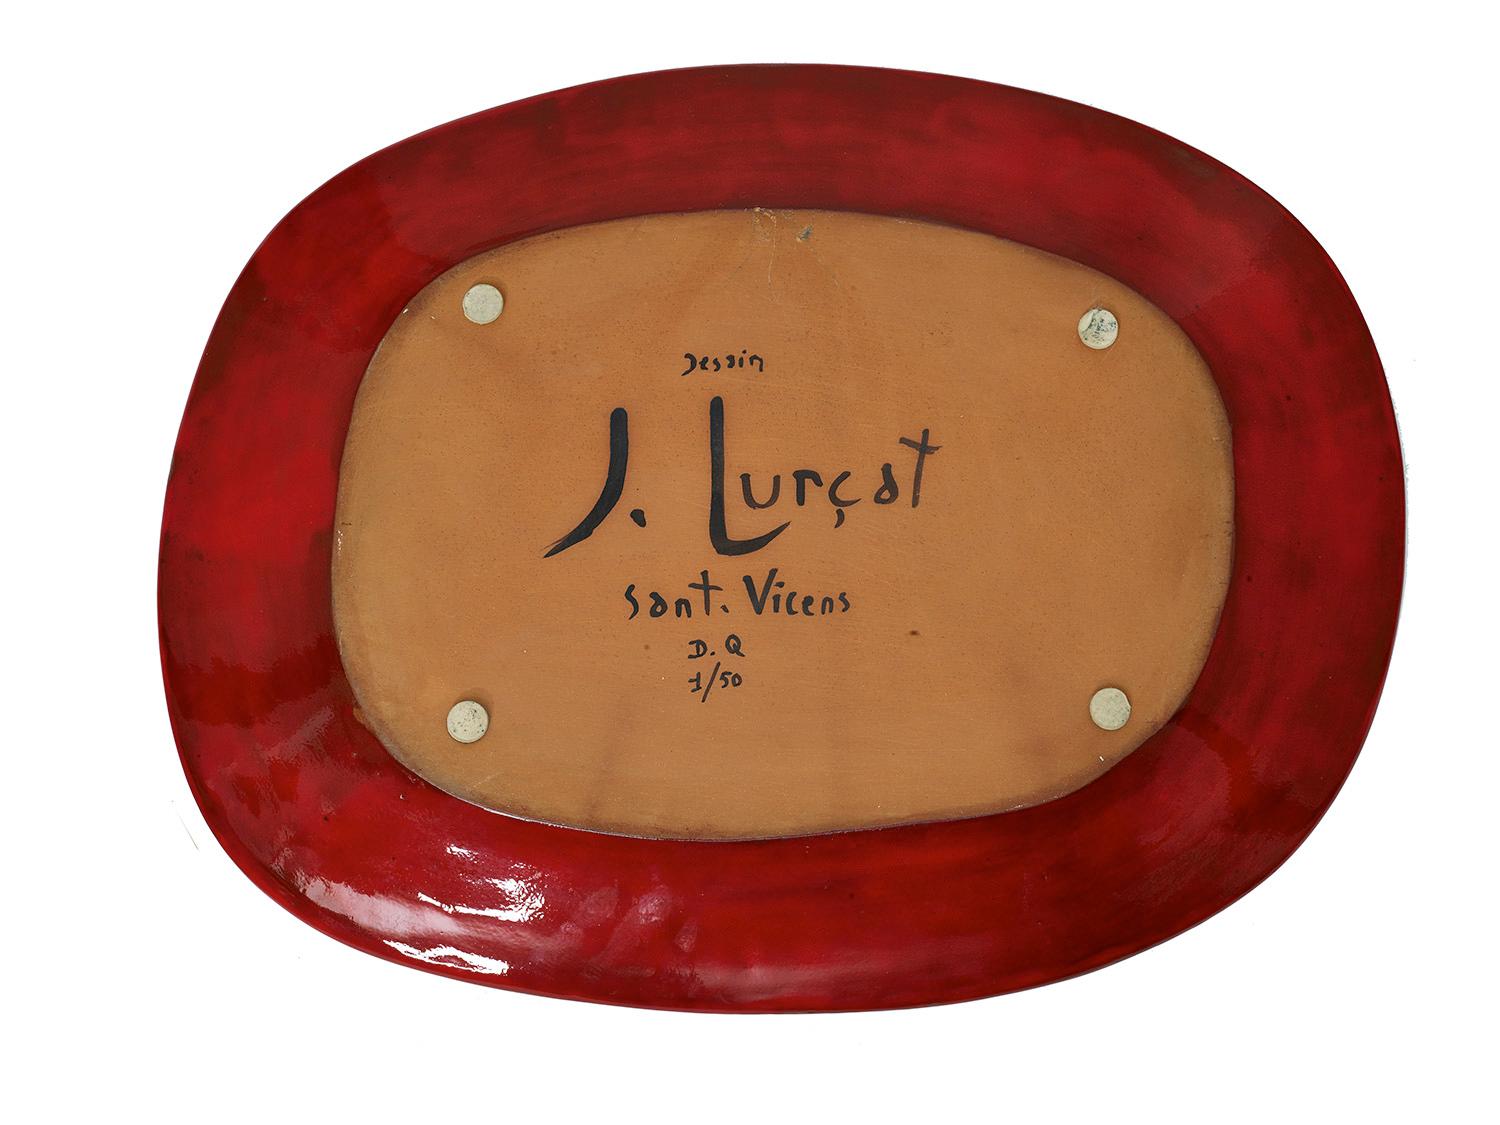 Mid-Century Modern Mid-Century Red Glazed Ceramic Dish by Jean Lurçat for Sant Vicens Marked 1/50